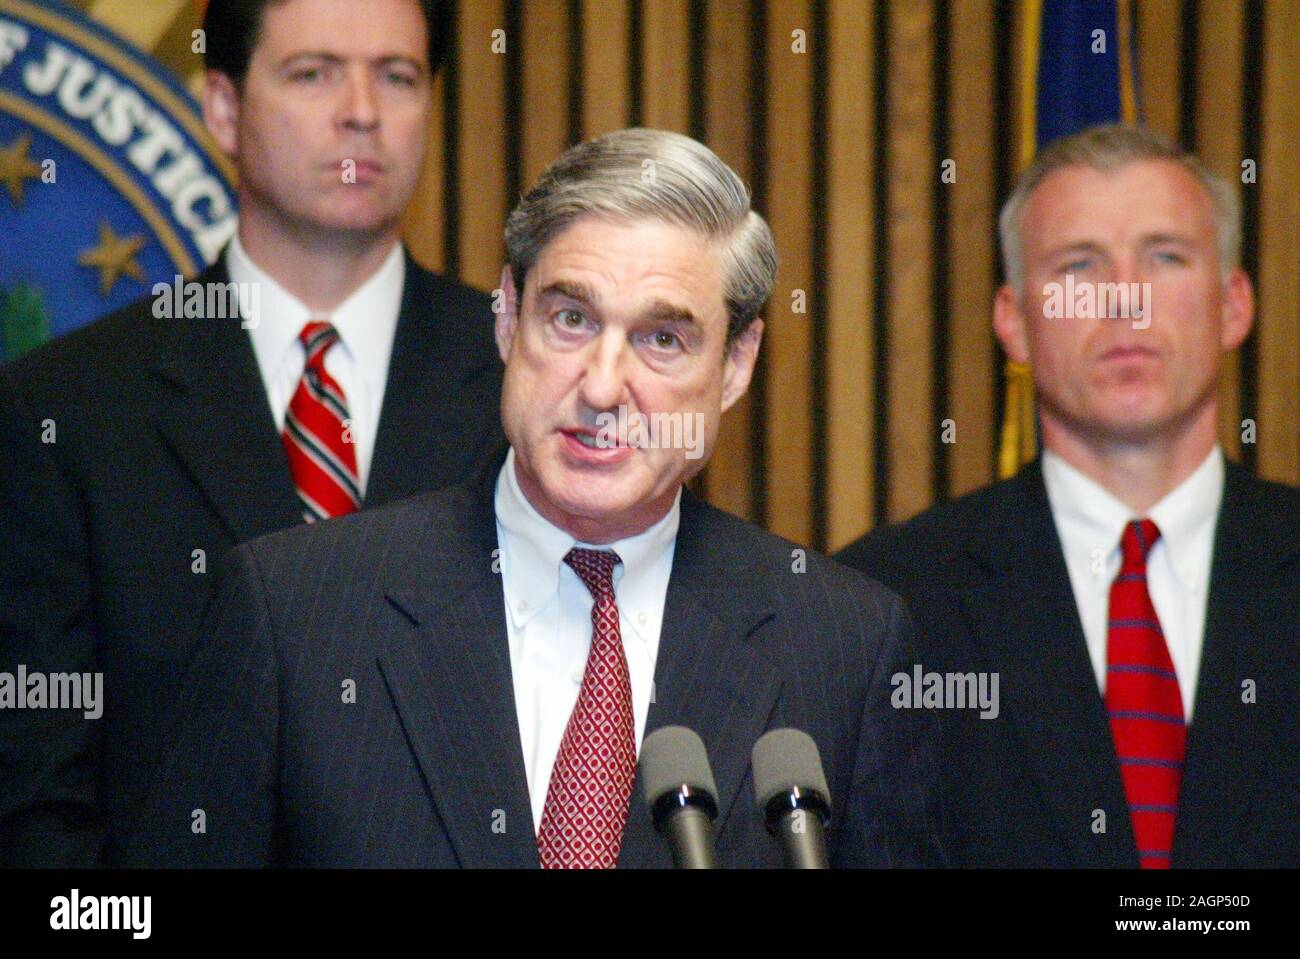 Robert Mueller, FBI Director. The Federal Bureau of Investigation (FBI) is the domestic intelligence and security service of the United States and its principal federal law enforcement agency. Operating under the jurisdiction of the United States Department of Justice, the FBI is also a member of the U.S. Intelligence Community and reports to both the Attorney General and the Director of National Intelligence. A leading U.S. counter-terrorism, counterintelligence, and criminal investigative organization, the FBI has jurisdiction over violations of more than 200 categories of federal crimes. Stock Photo